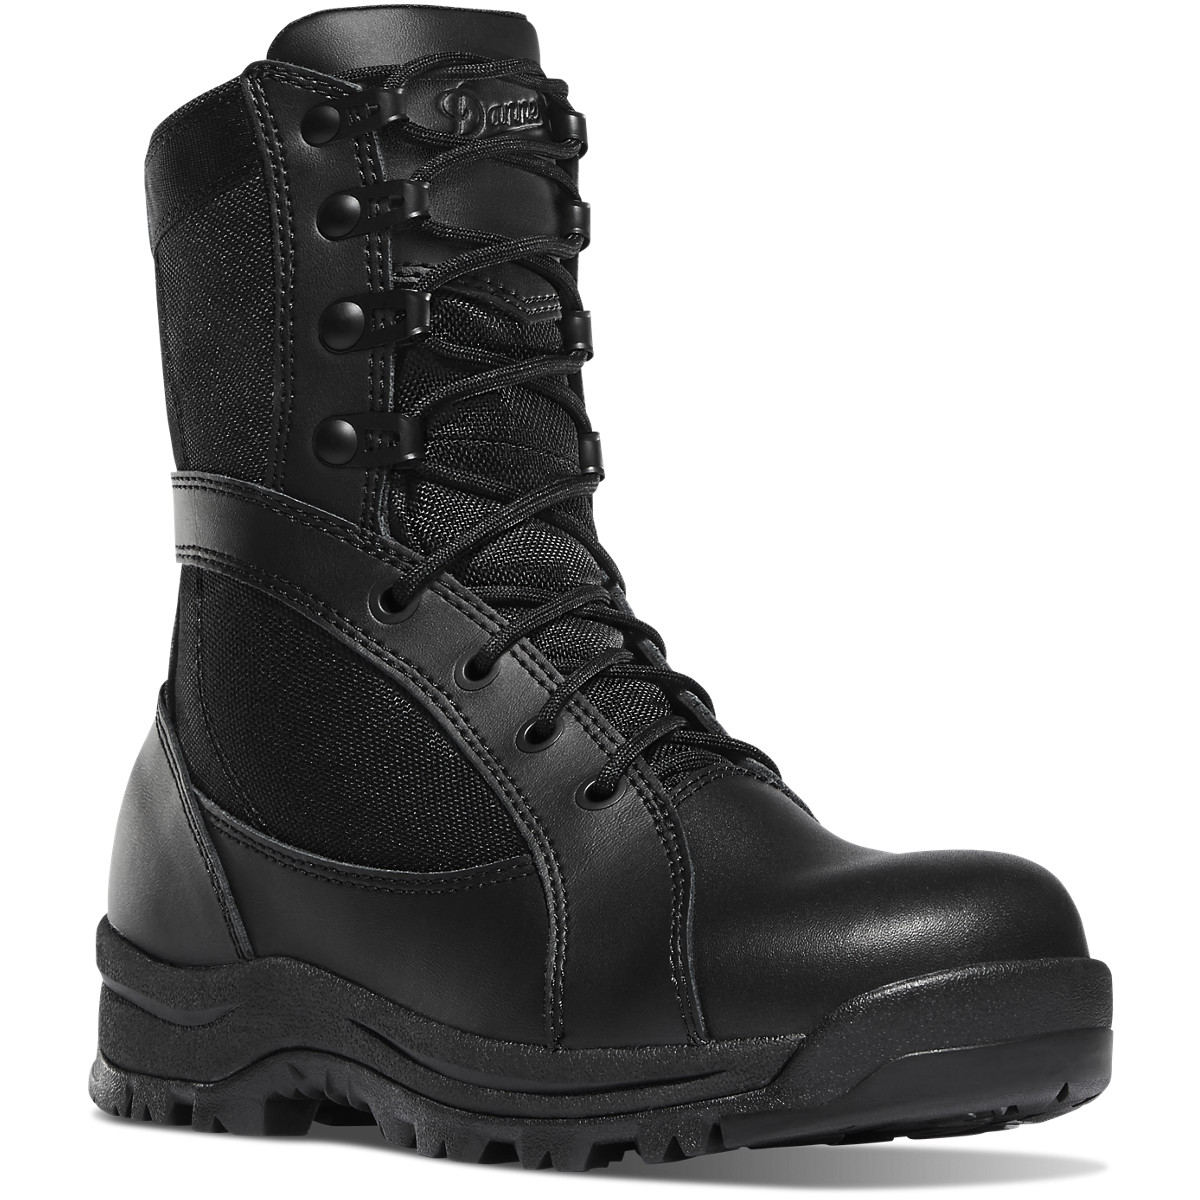 Danner Womens Prowess Boots Black - TUM968205